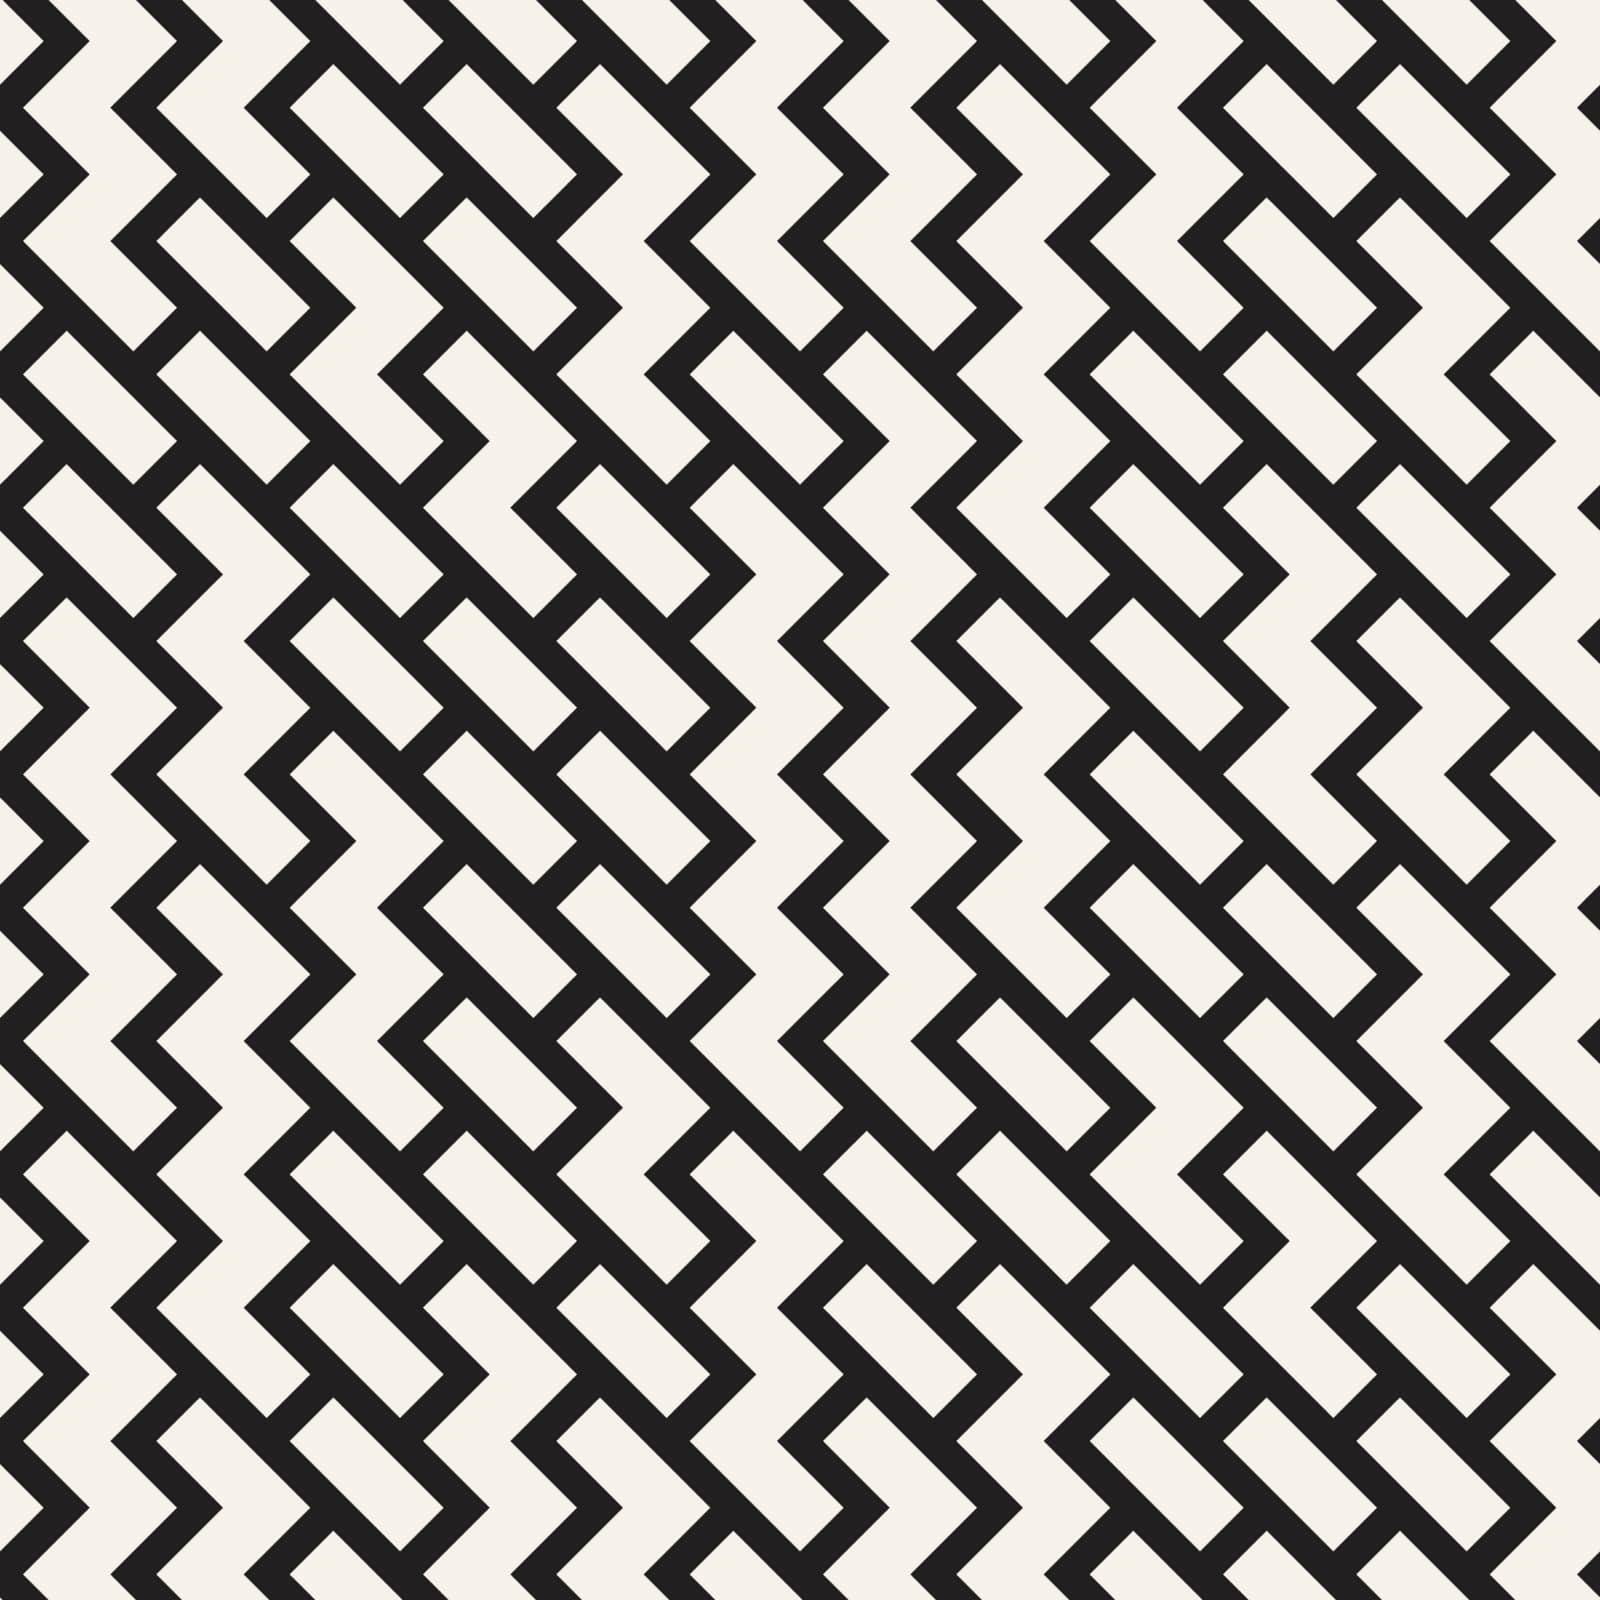 Irregular Maze Shapes Tiling Contemporary Graphic Design. Vector Seamless Black and White Pattern by Samolevsky